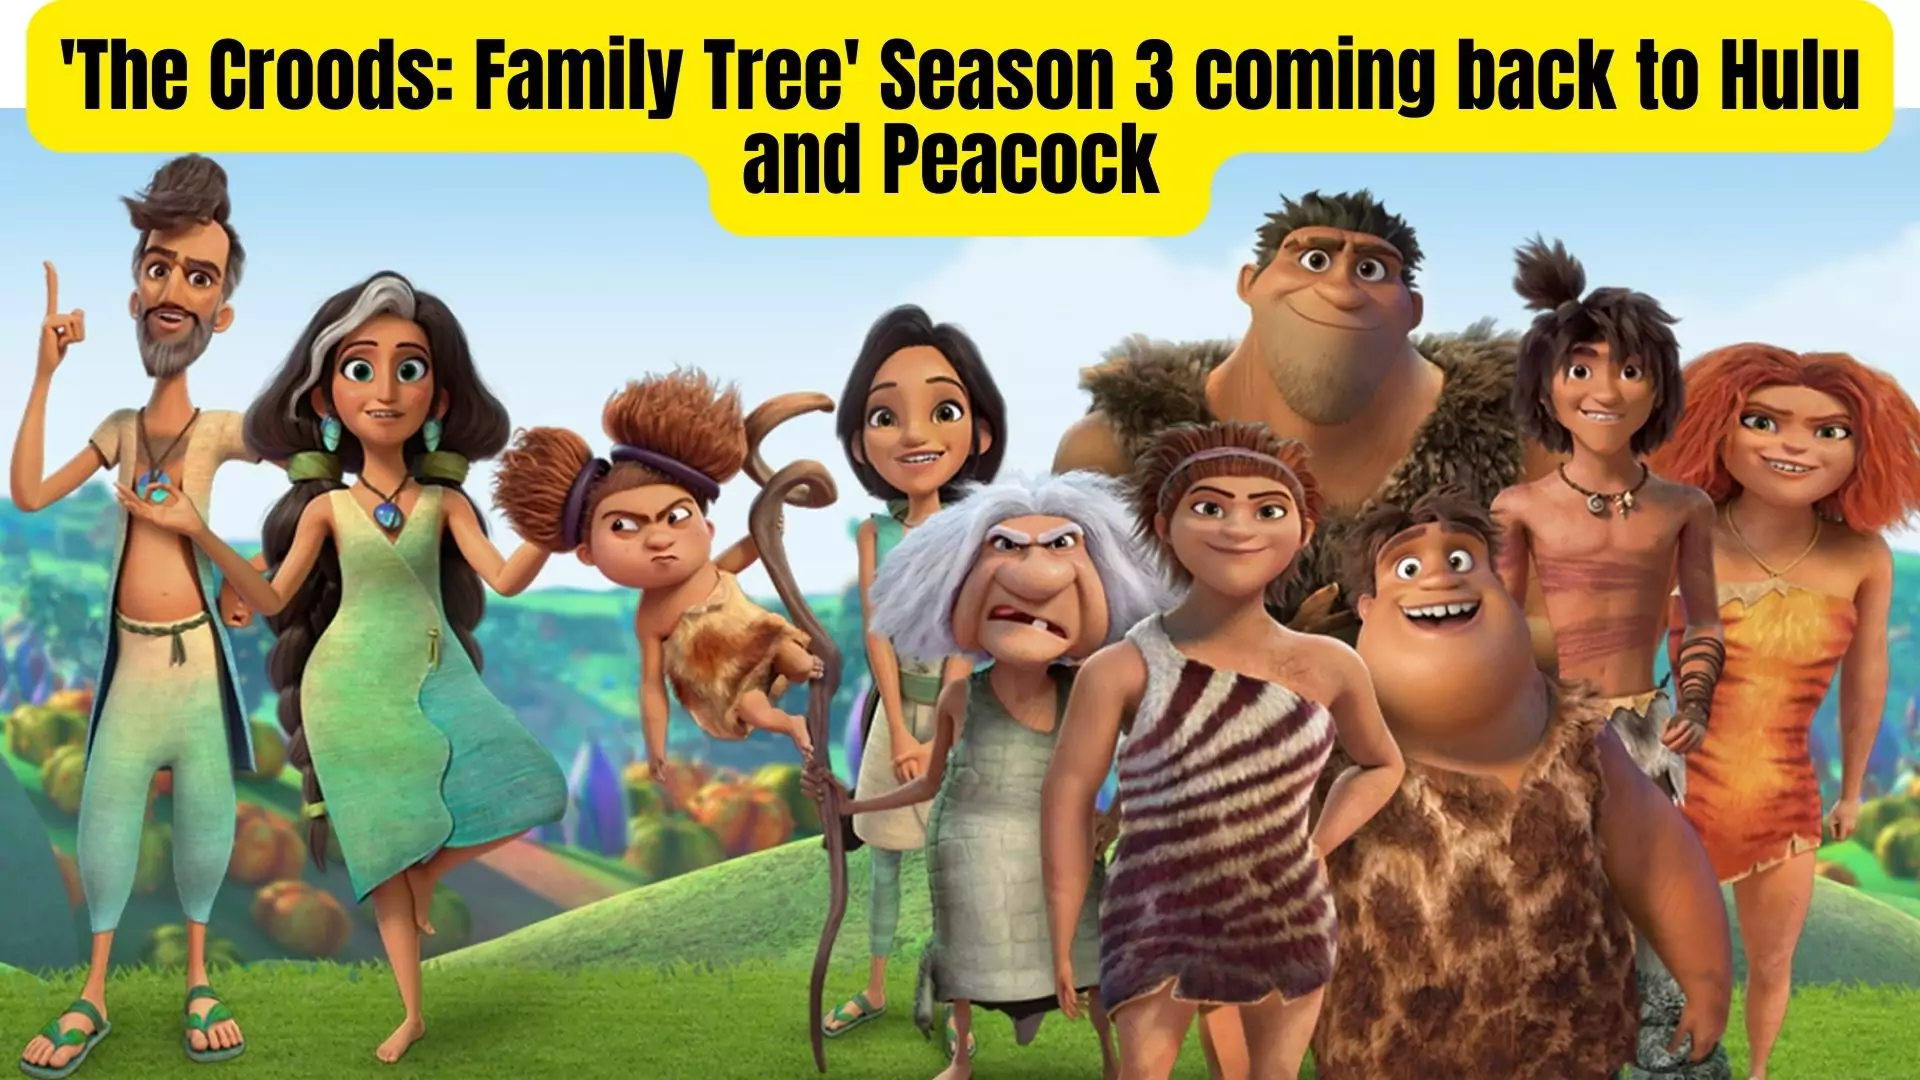 'The Croods: Family Tree' Season 3 coming back to Hulu and Peacock with the goal of survival.